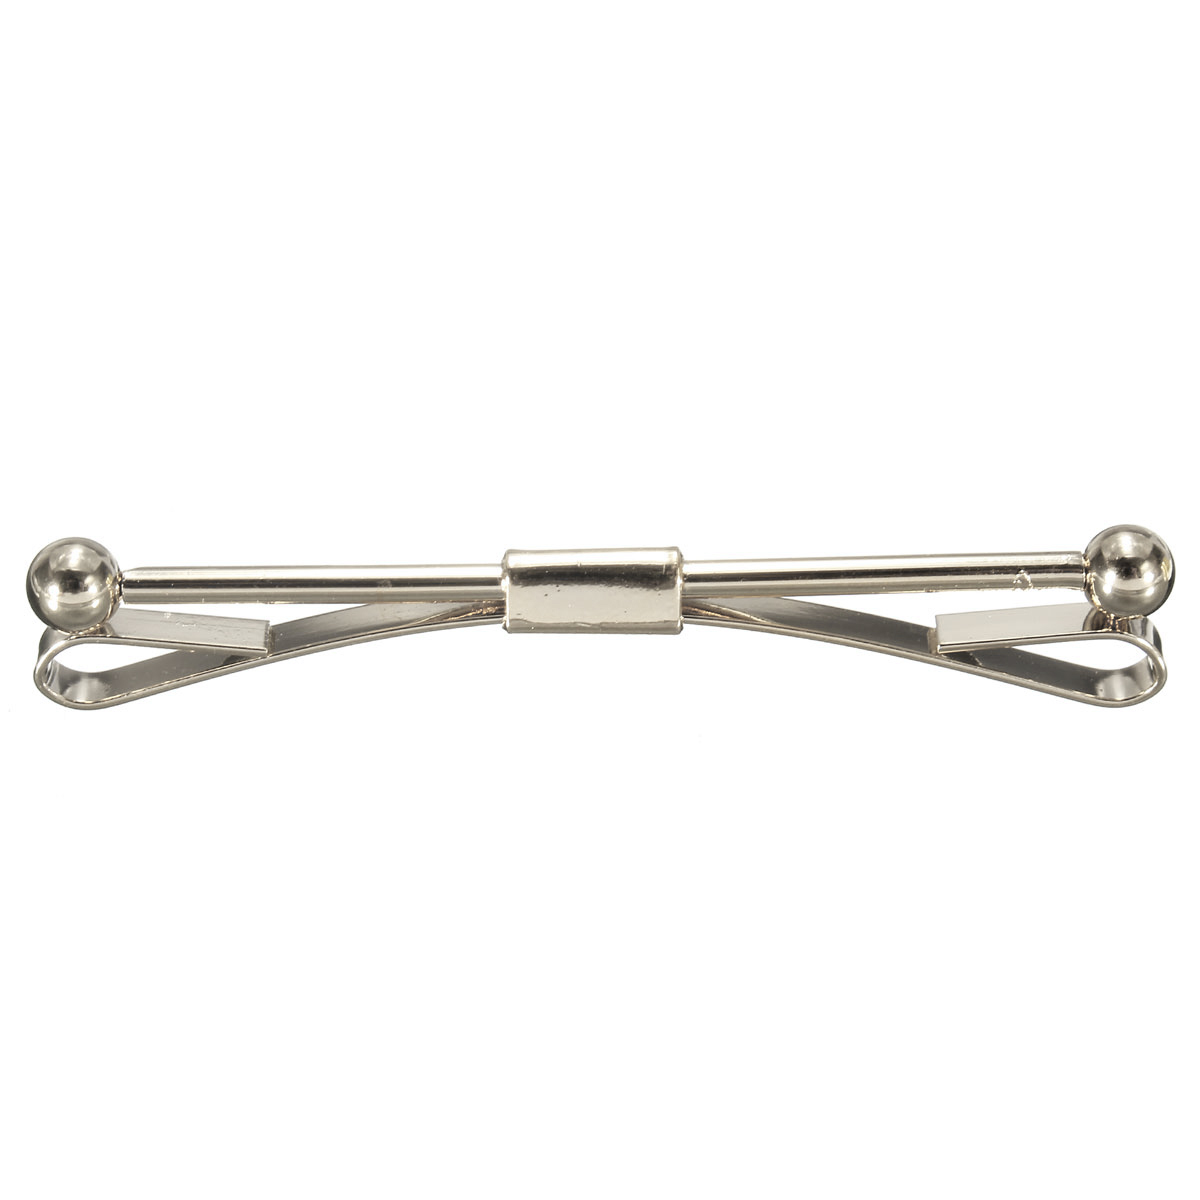 Men-Silver-Gold-Necktie-Tie-Clip-Bar-Clasp-Cravat-Pin-Skinny-Collar-Brooch-Without-Chain-1027211